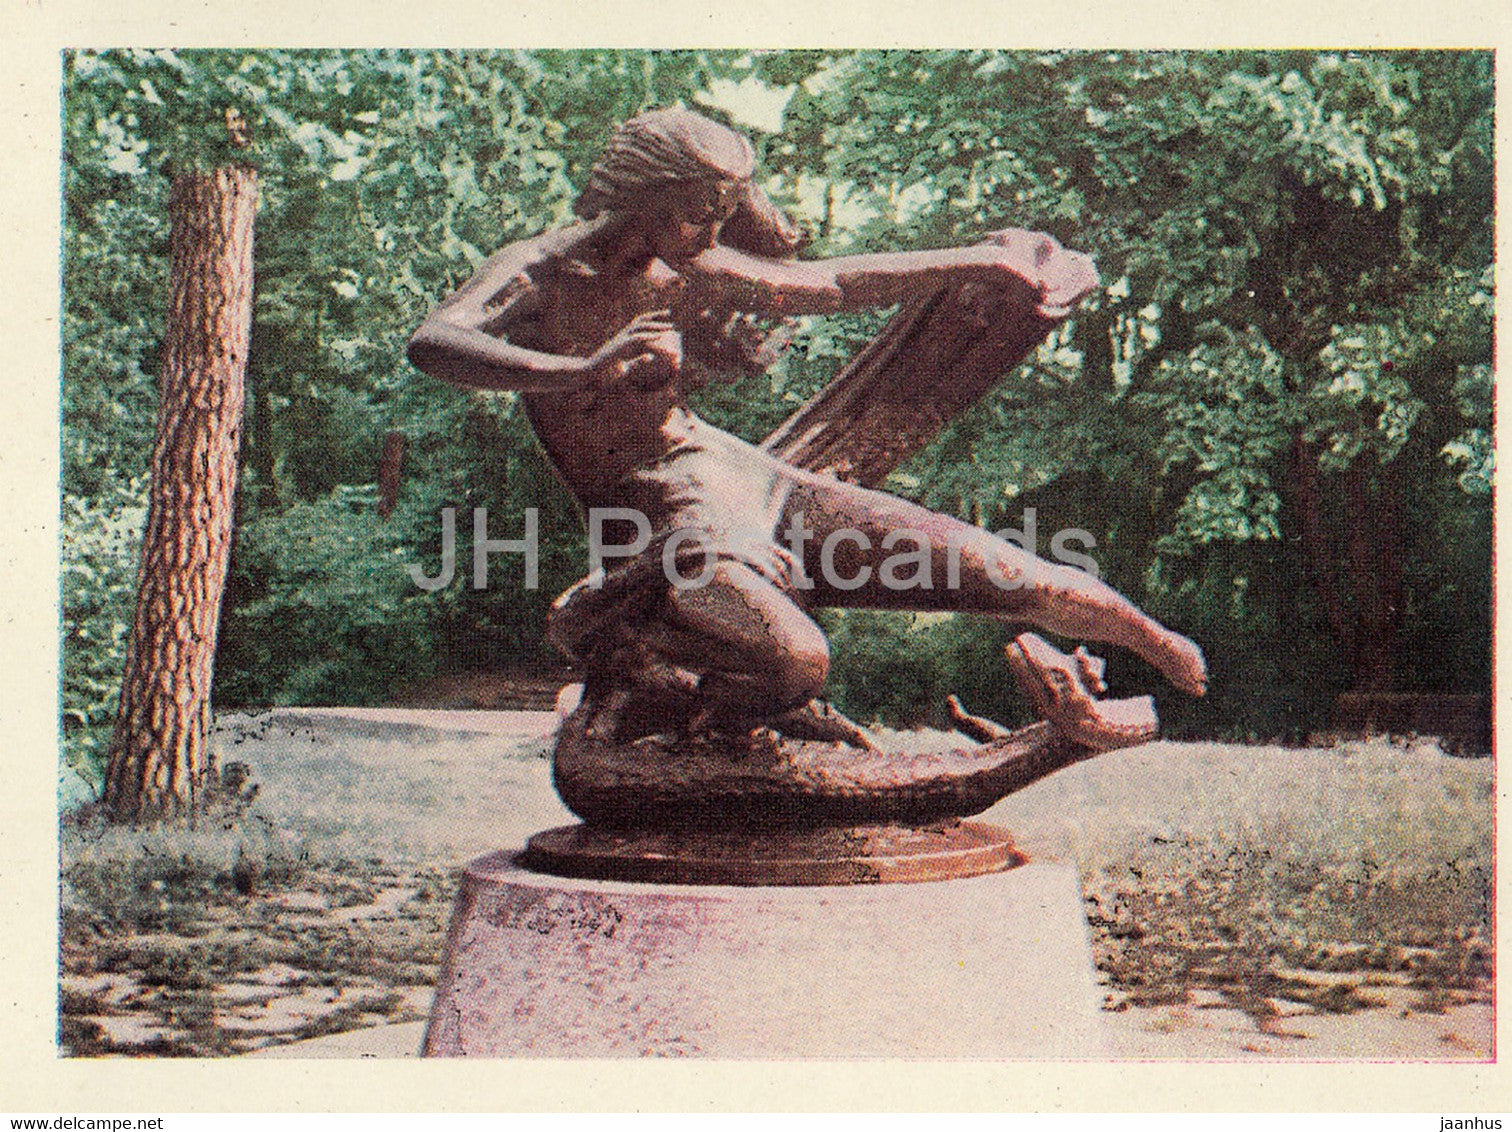 Palanga - Egle Queen of Grass Snakes - sculpture - 1 - Lithuania USSR - unused - JH Postcards